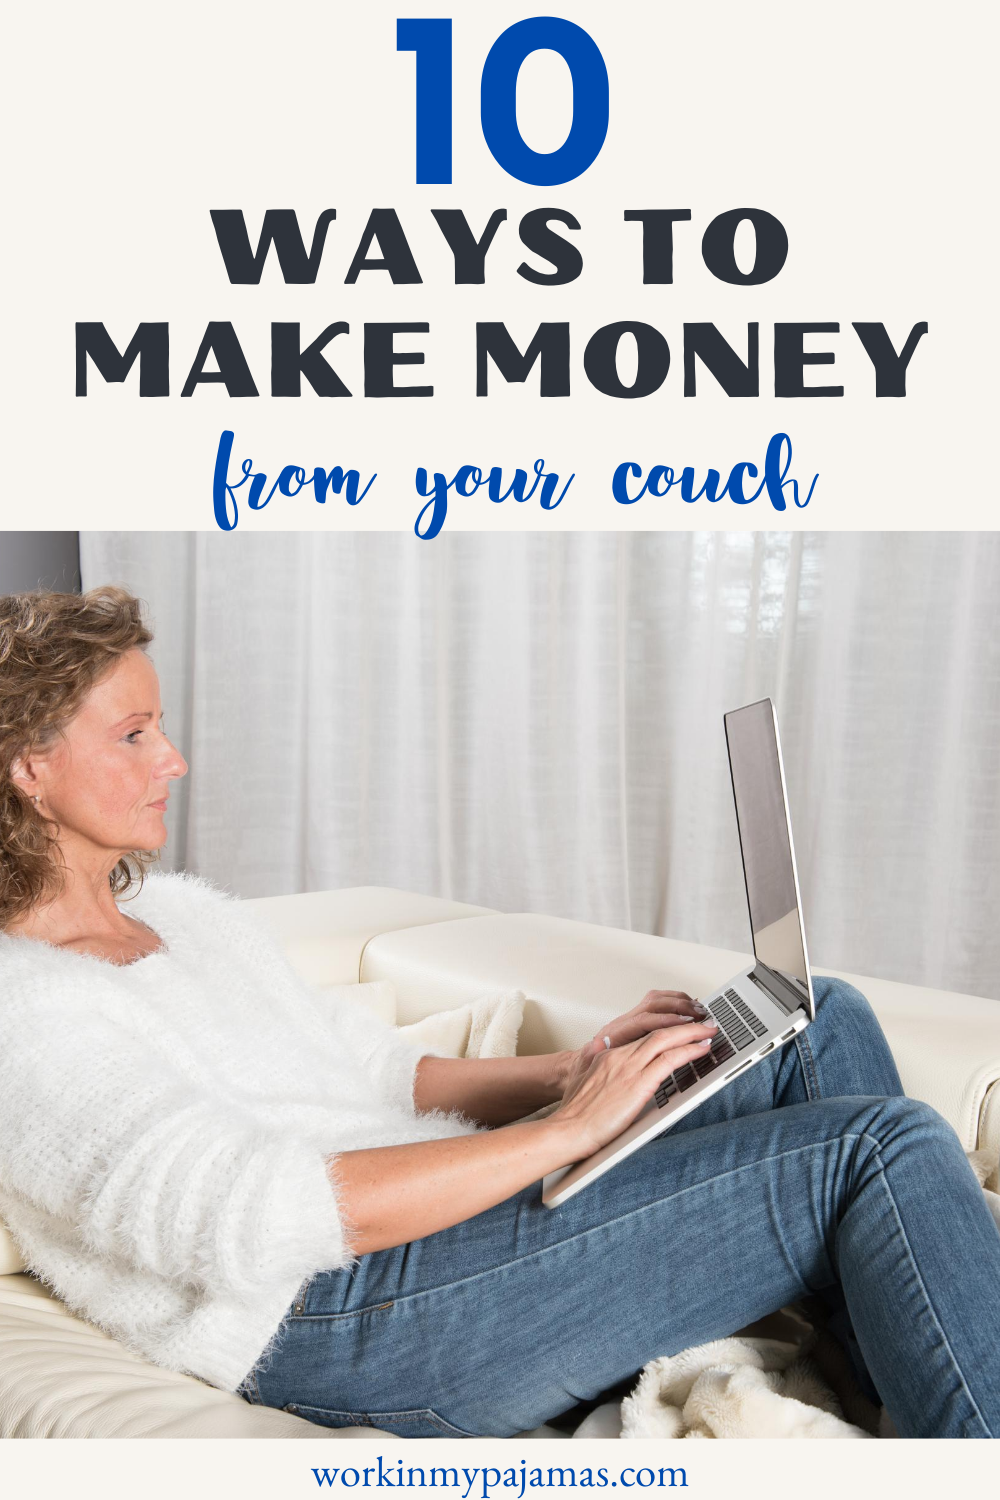 Make Money From Your Couch